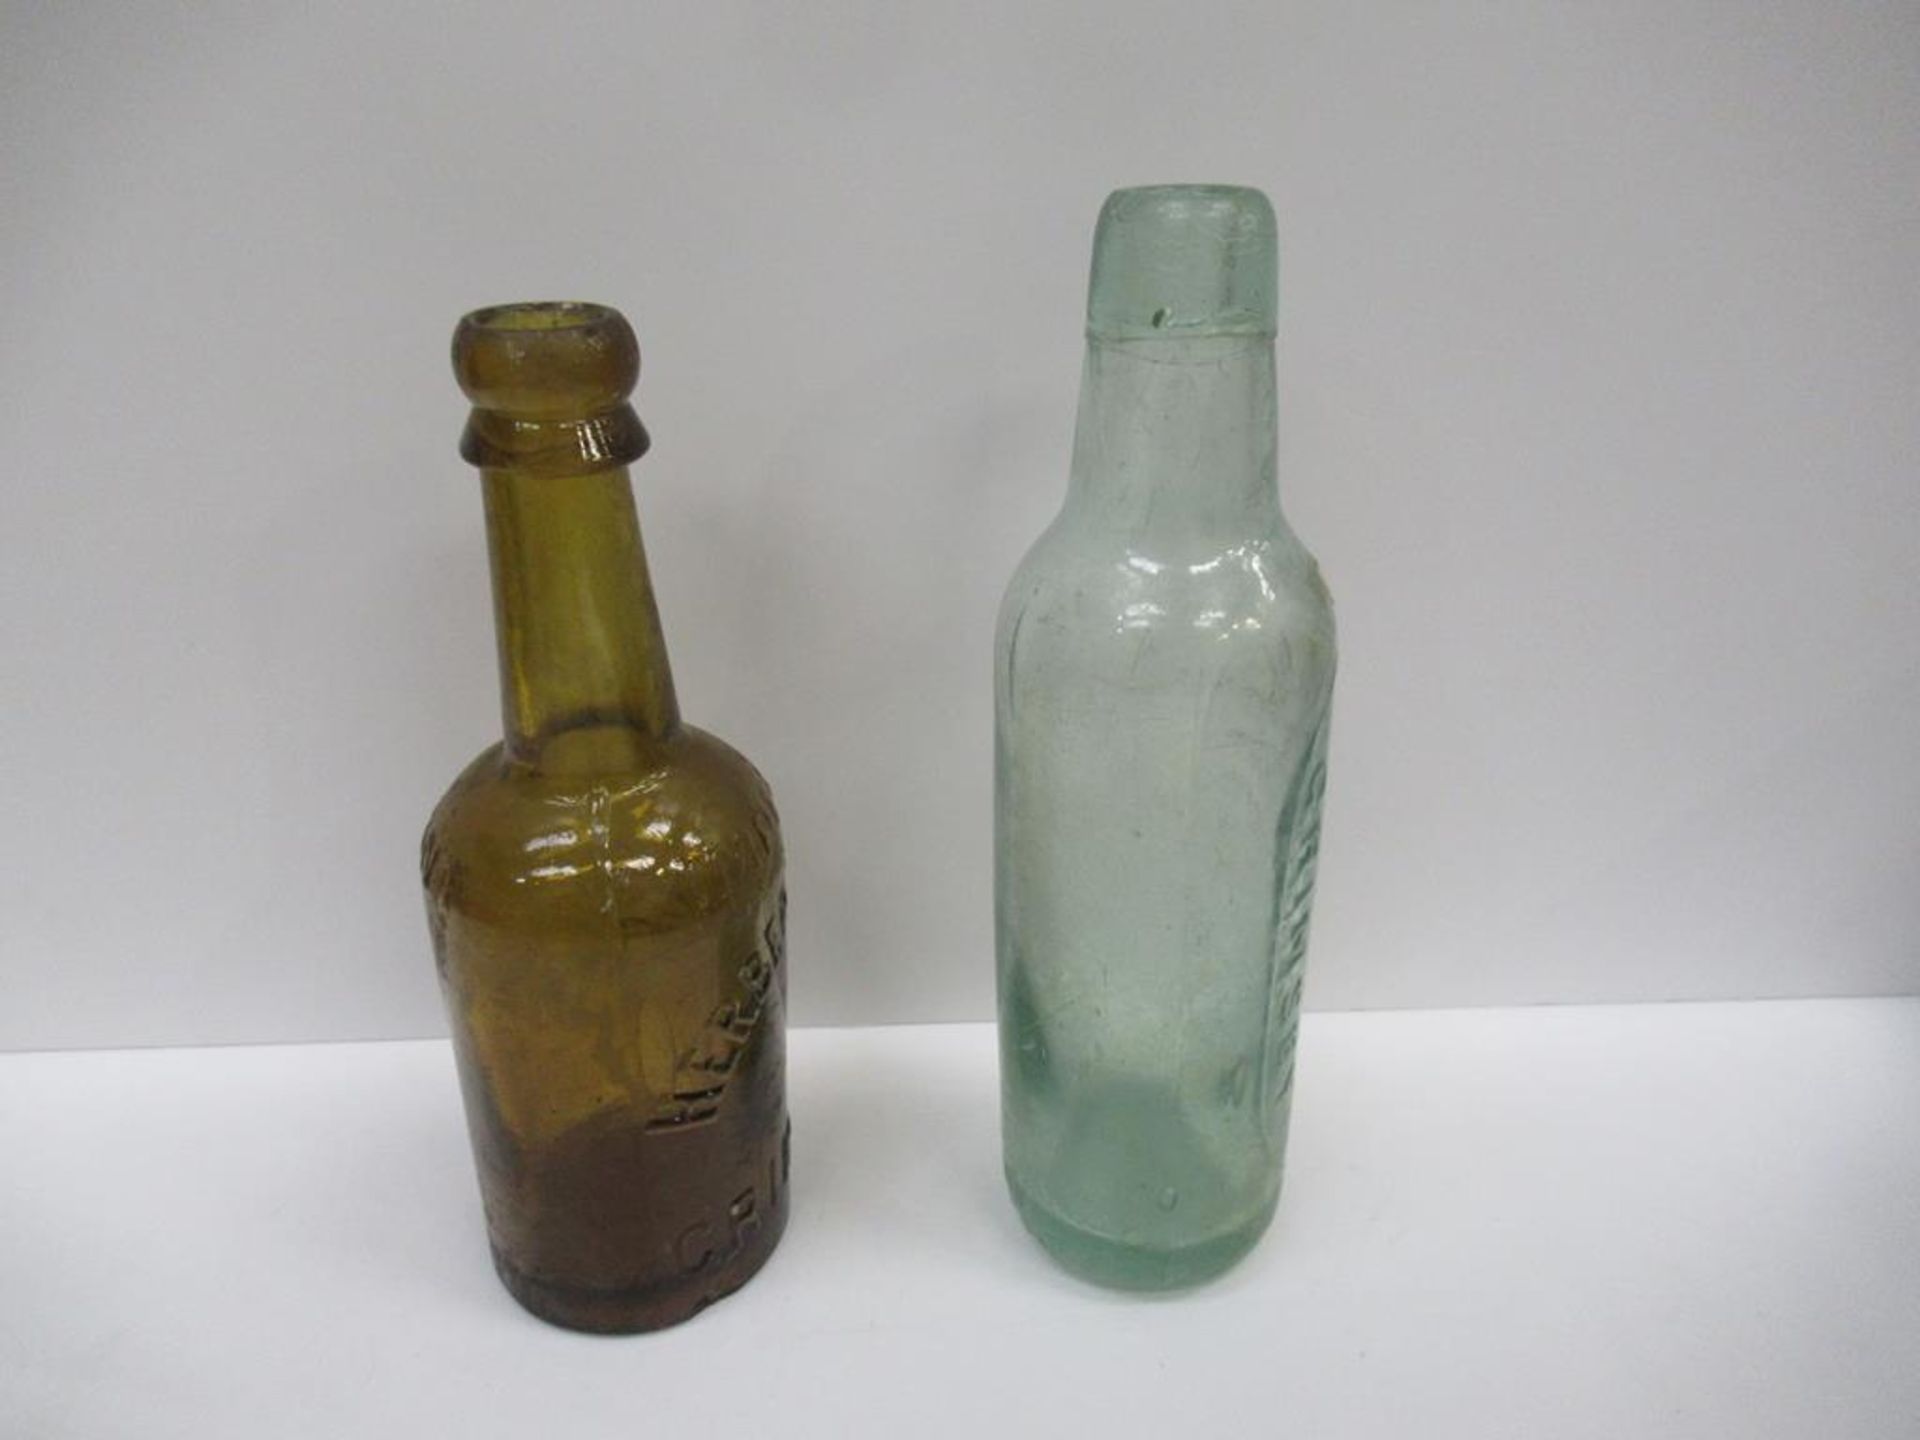 5x Grimsby Herbert Coulton (3) E.W Beckett & Co (1) and Beckett & Sons (1) bottles (4x coloured) - Image 14 of 20